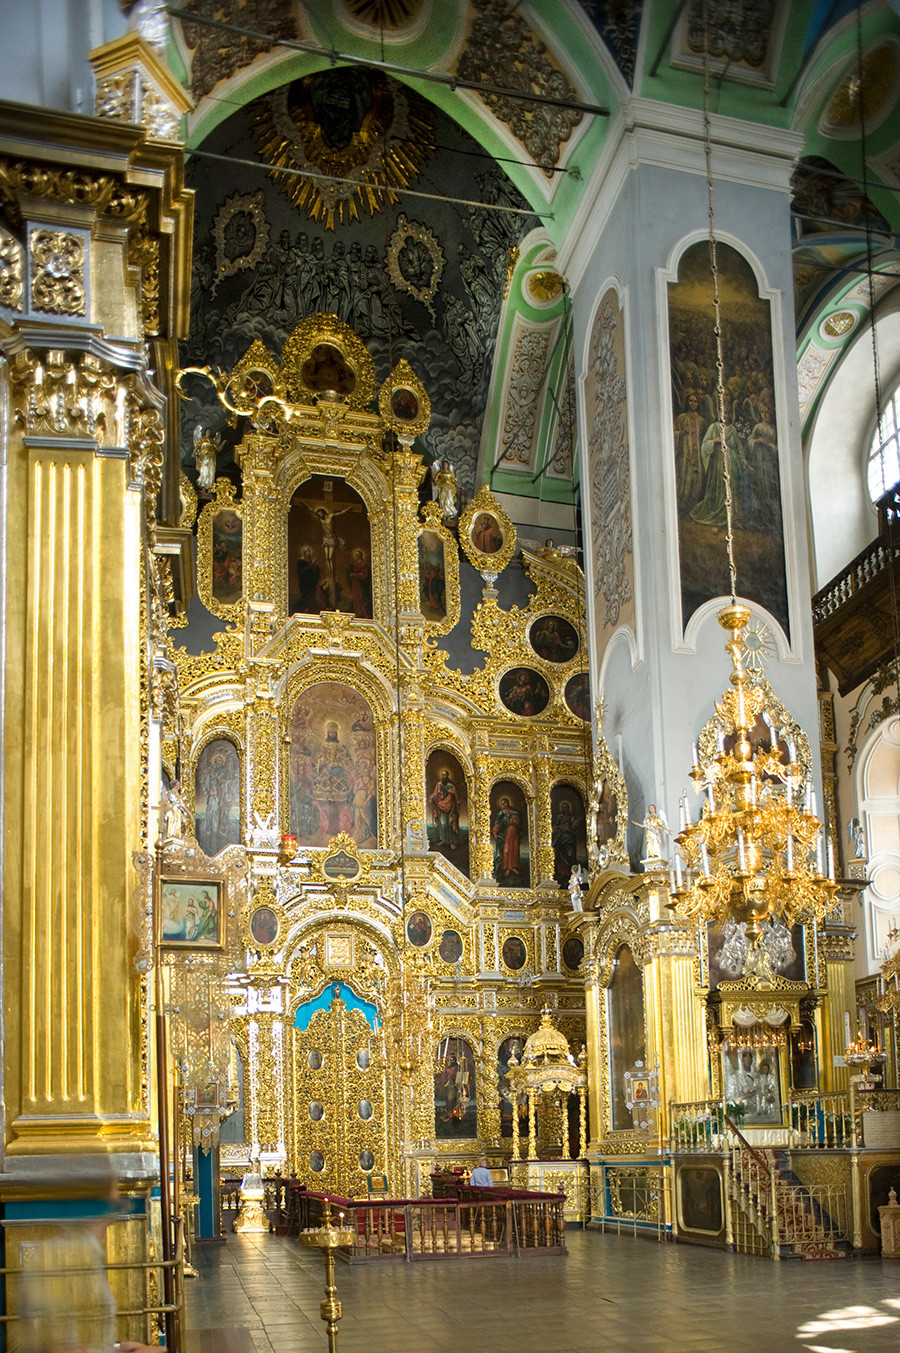 Smolensk. Dormition Cathedral, view of icon screen & baldachin with copy of Smolensk Icon. July 1, 2014